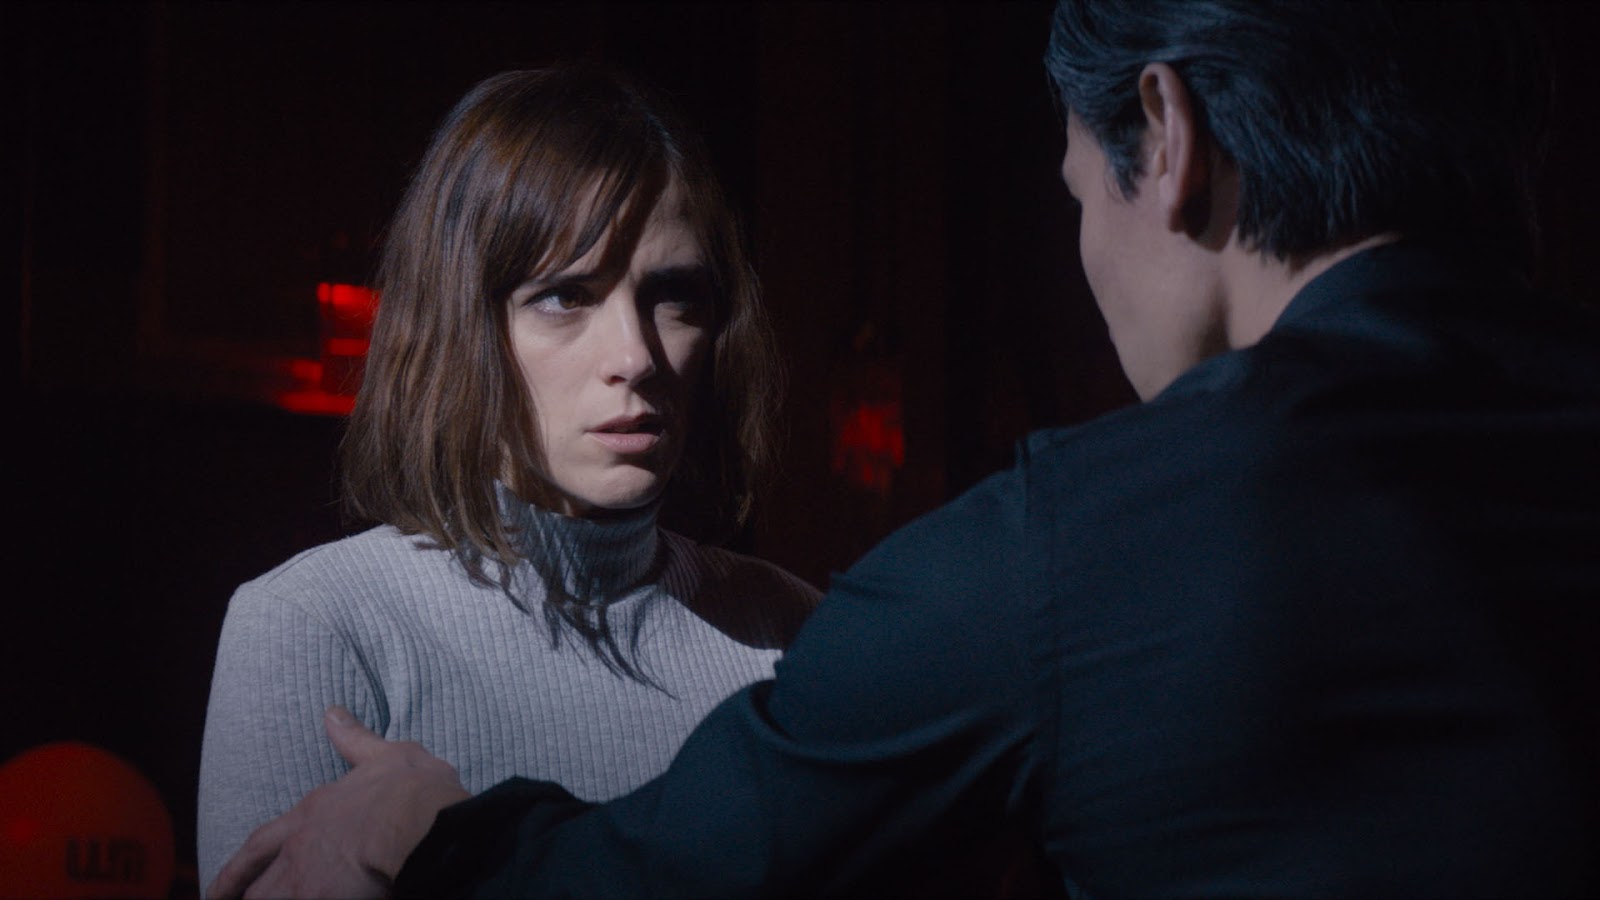 Housewife Clementine Poidatz in drawn into the clutches of cult leader David Sakurai in Housewife (2017)